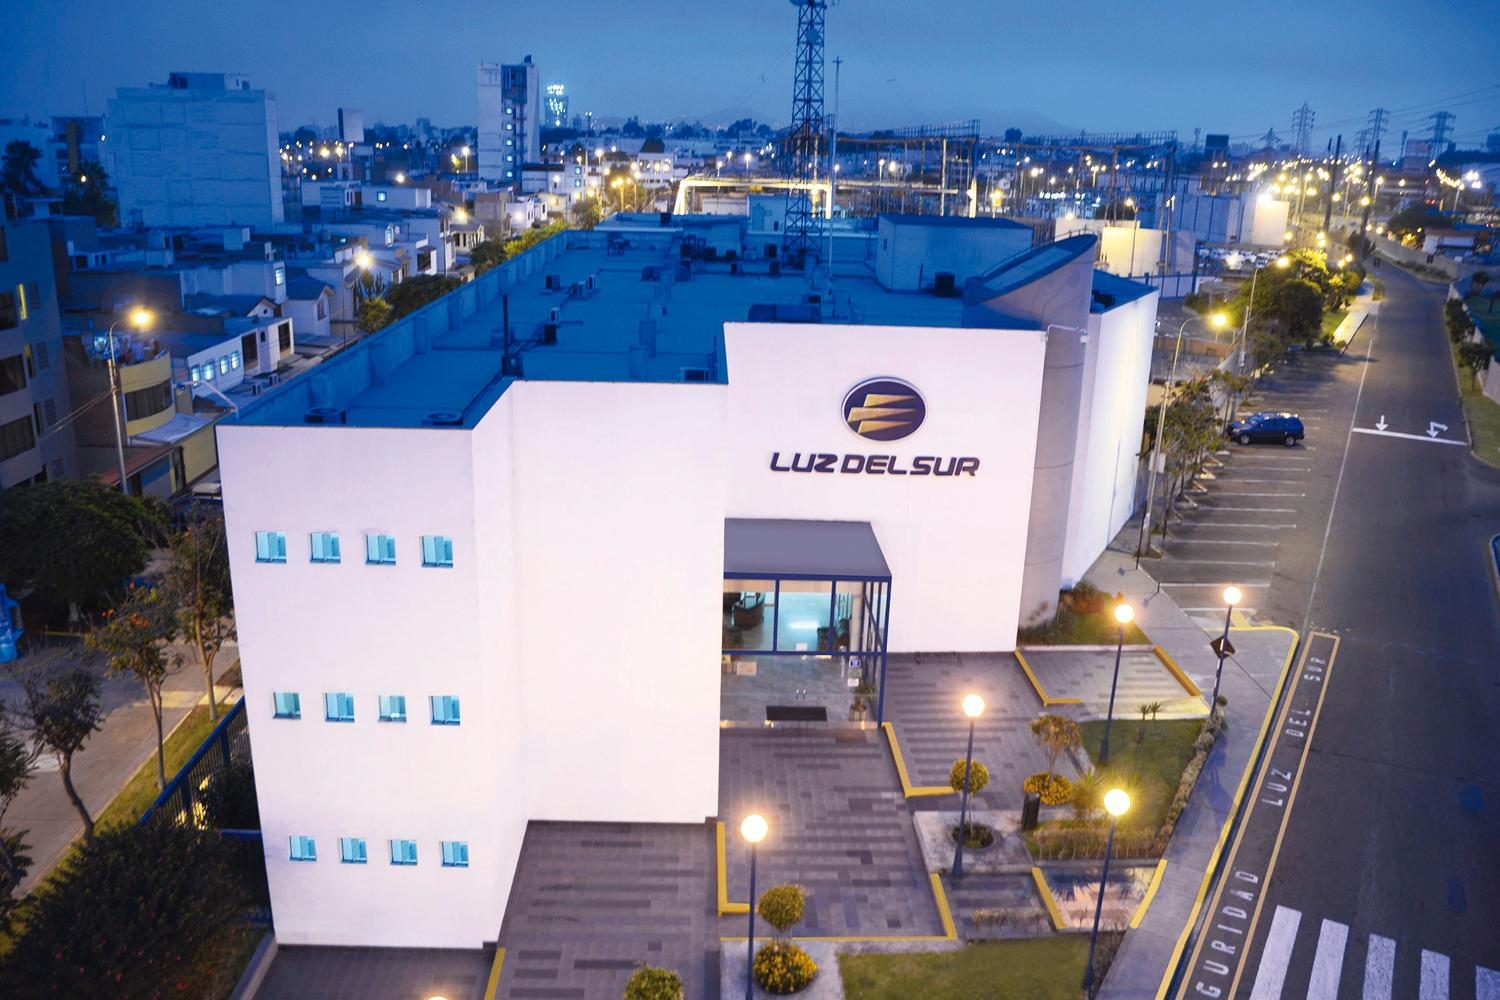 China’s Yangtze Power buys 83.6% stake in Peru’s Luz Del Sur for $3.59b